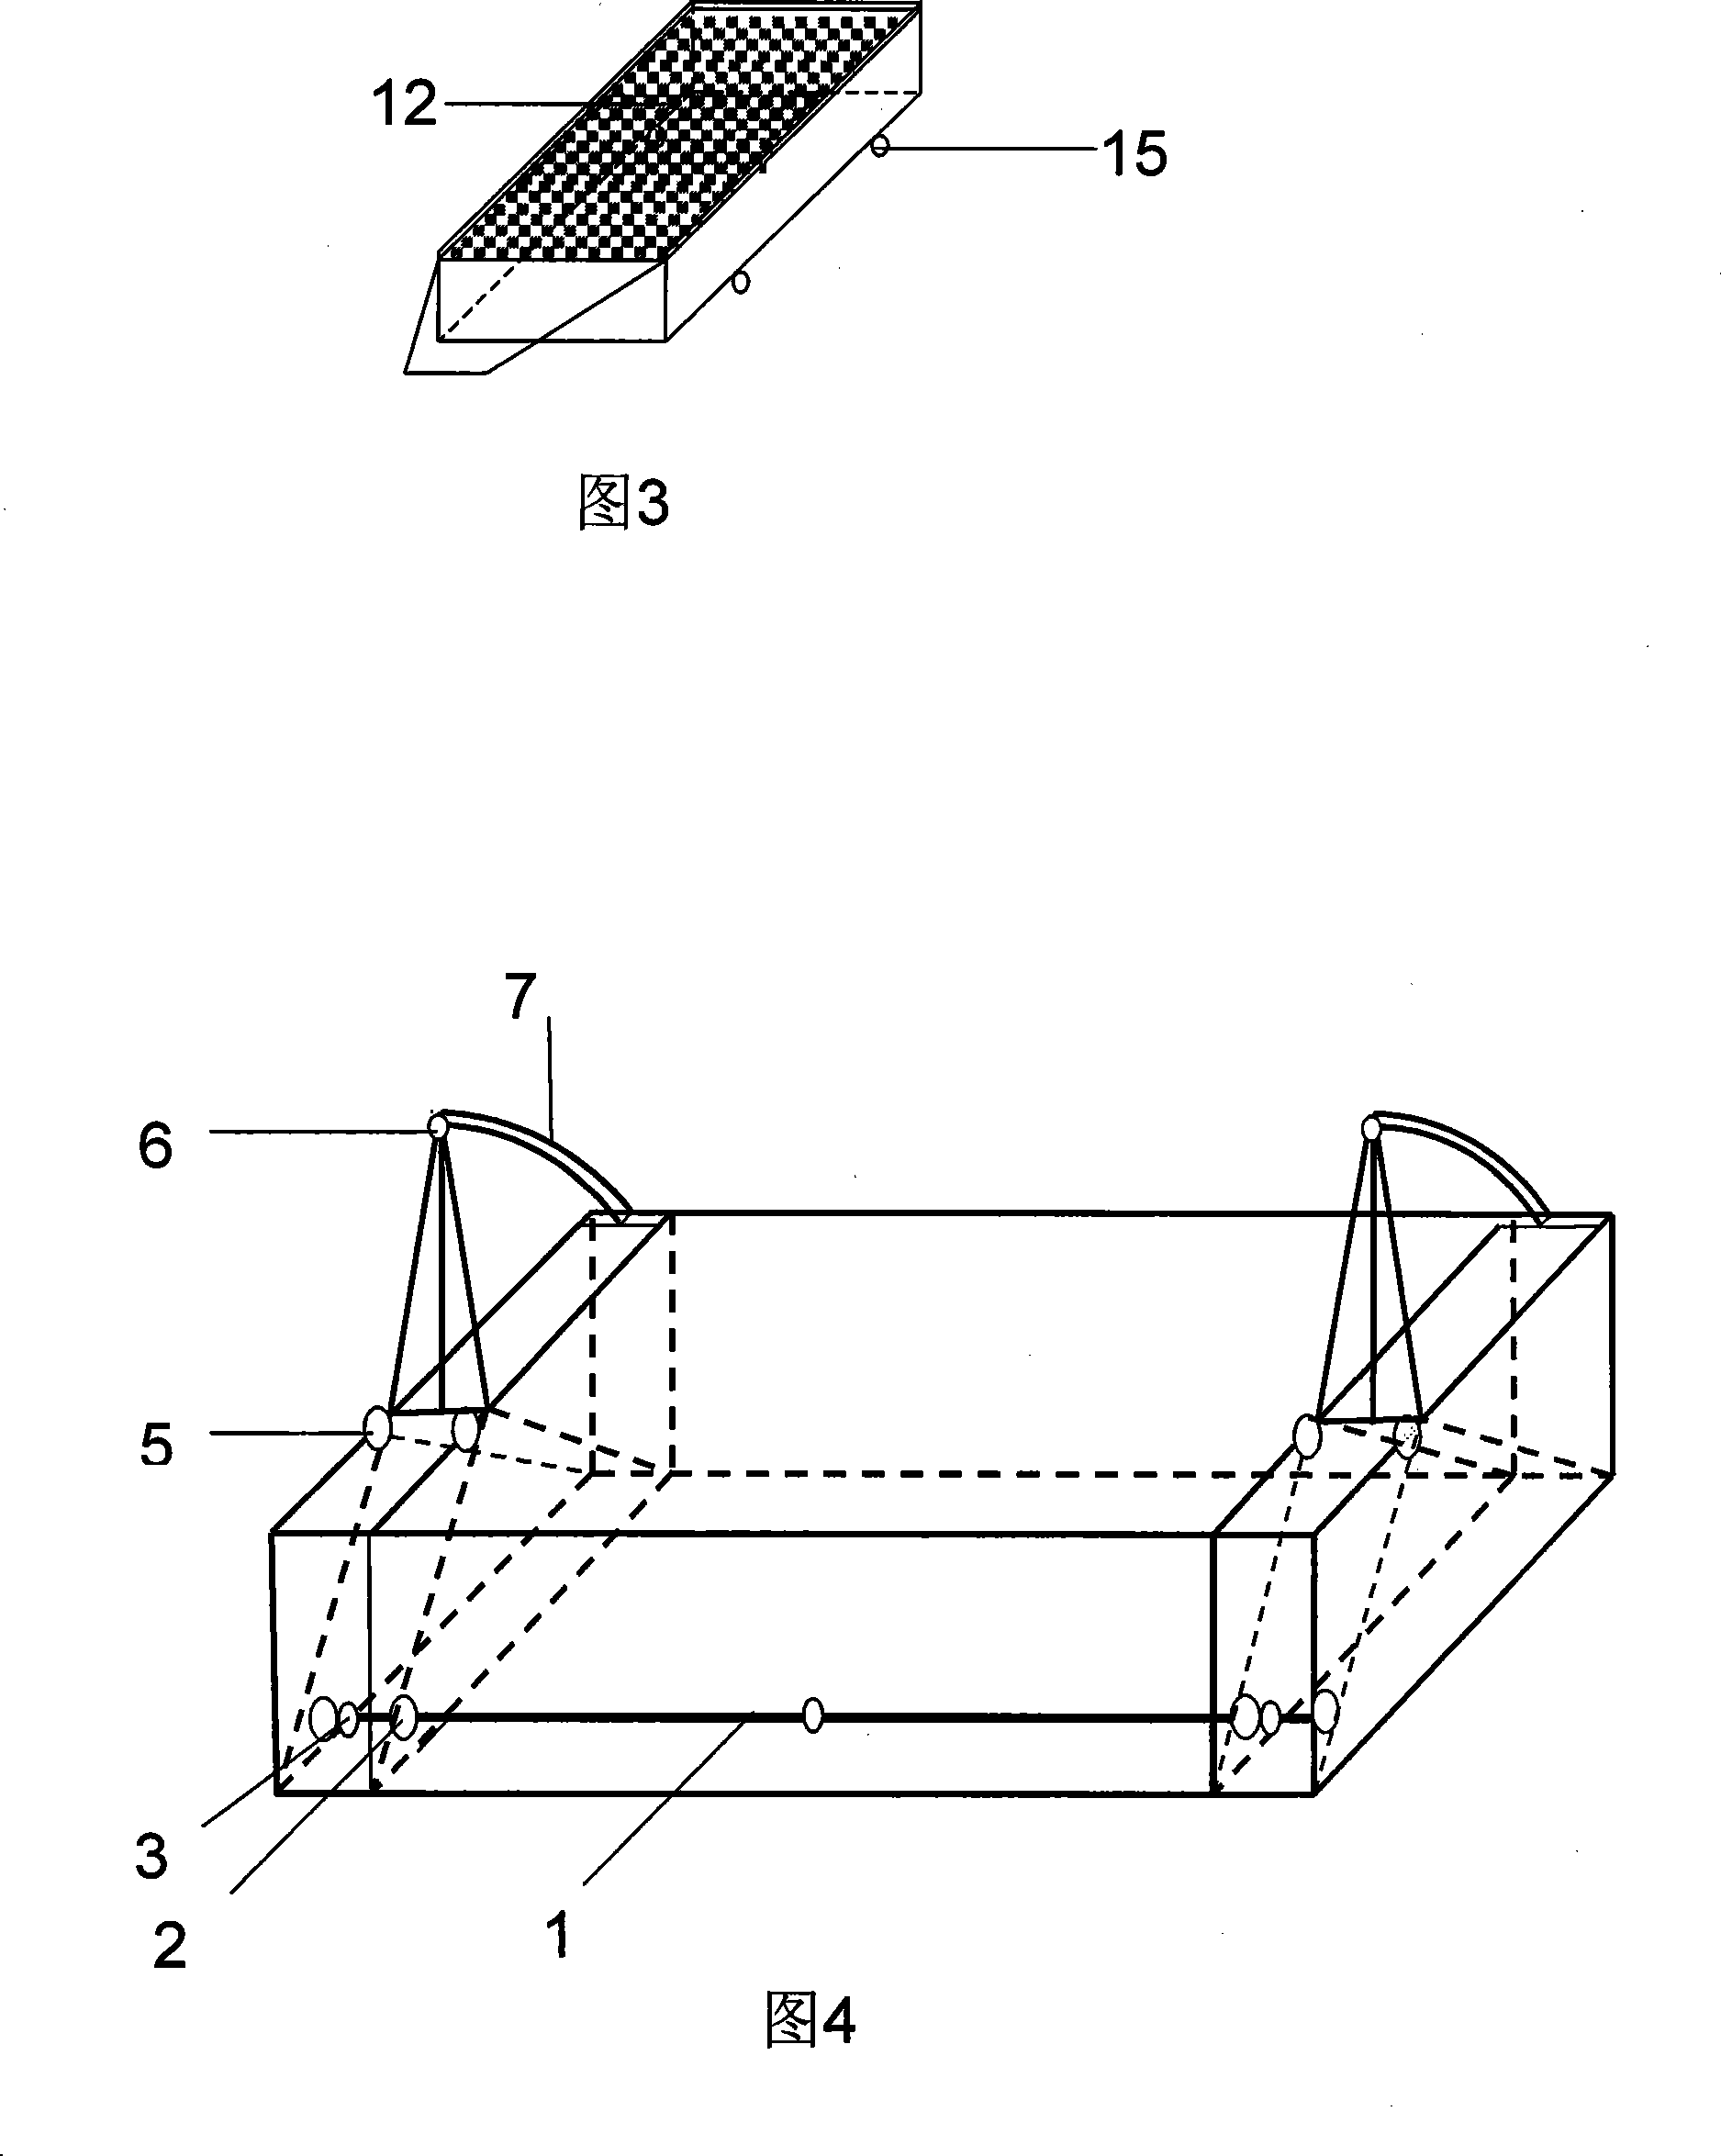 Test device for simulating ecological rock mechanical slope protection under rainfall precipitation condition